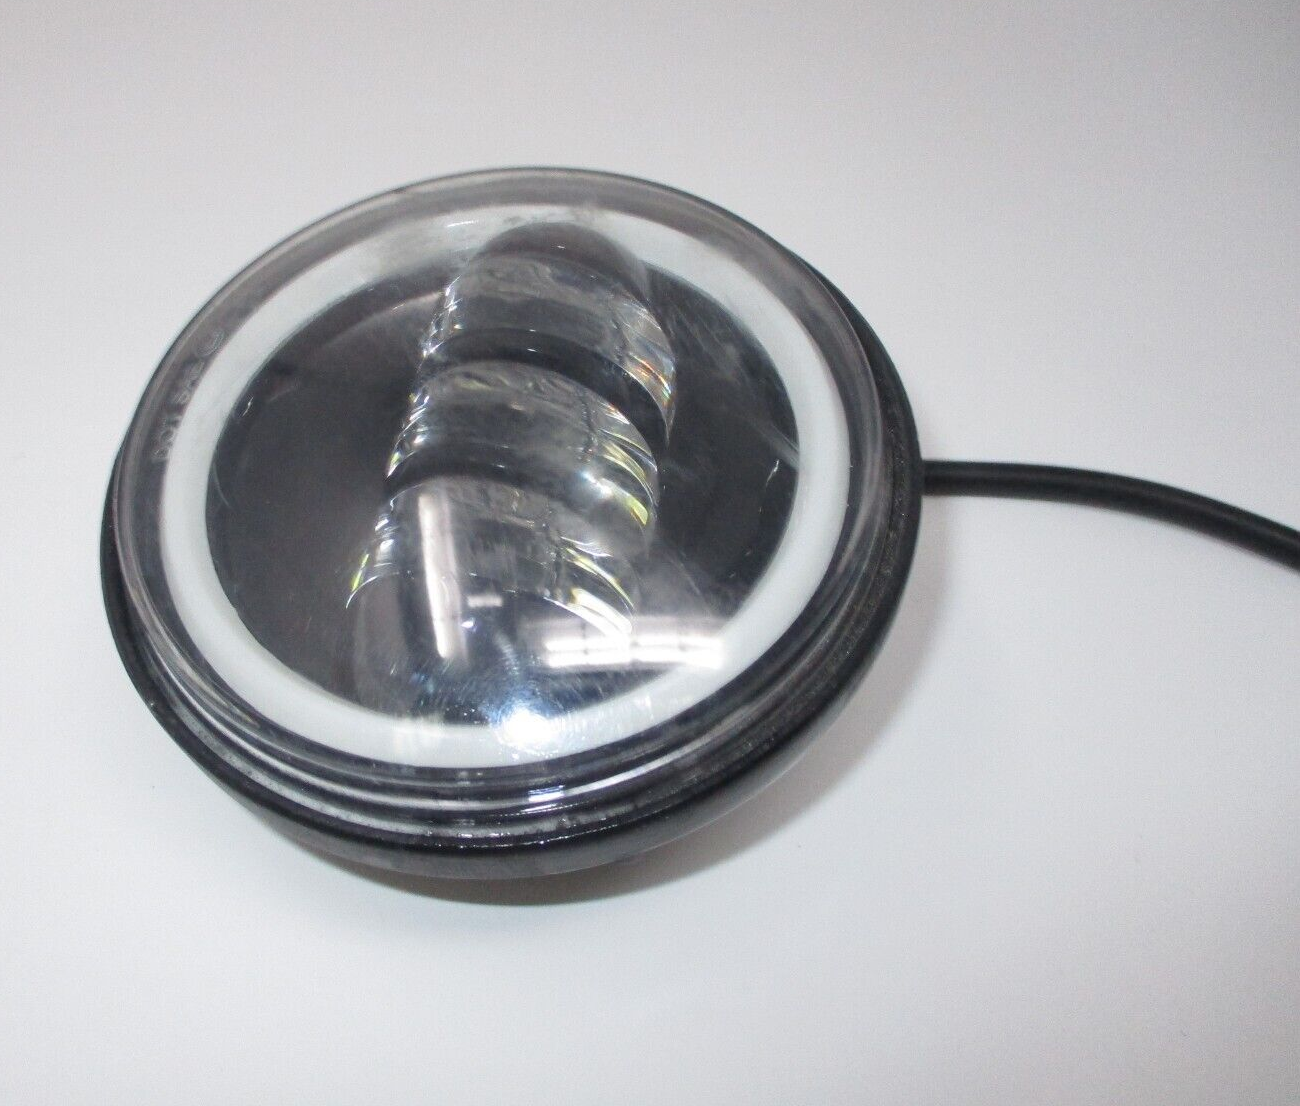 4.5" LED SPOT Lamp with Halo Ring 3 Wires